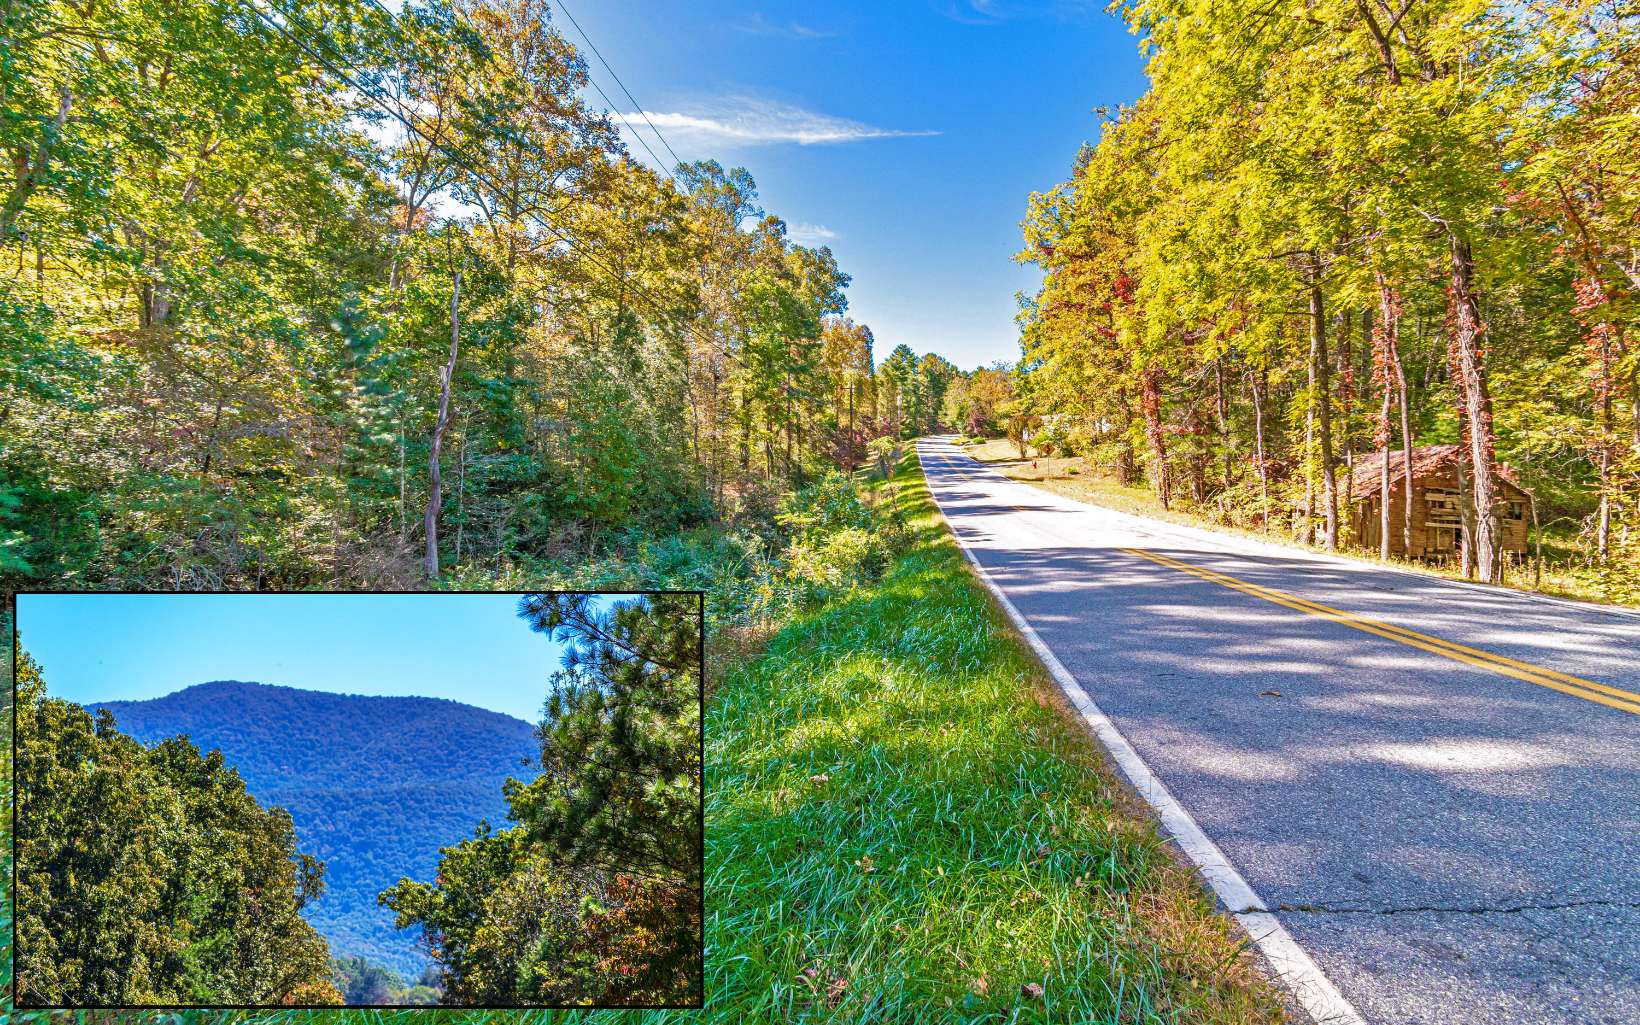 Comprised of two lots (21 and 22), these 7.07 acres located in the gated community of Highland Park have it all -- gentle terrain, Brackett Creek frontage, Long Range Views of Lake Nottely and Appalachian Mountains. Just under 5 miles from Downtown Blairsville and shopping, these two lots have road frontage from Eastridge Ct and Pat Colwell Rd, which renders easy access to Hwy 515. The subdivision is one of Blairsville's most beautiful lake communities, and features Craftsman styled homes, gorgeous clubhouse w/fully loaded kitchen and party space, outdoor grilling area, boat slips, workout facilities, and a relaxing saltwater infinity pool that overlooks Lake Nottely.